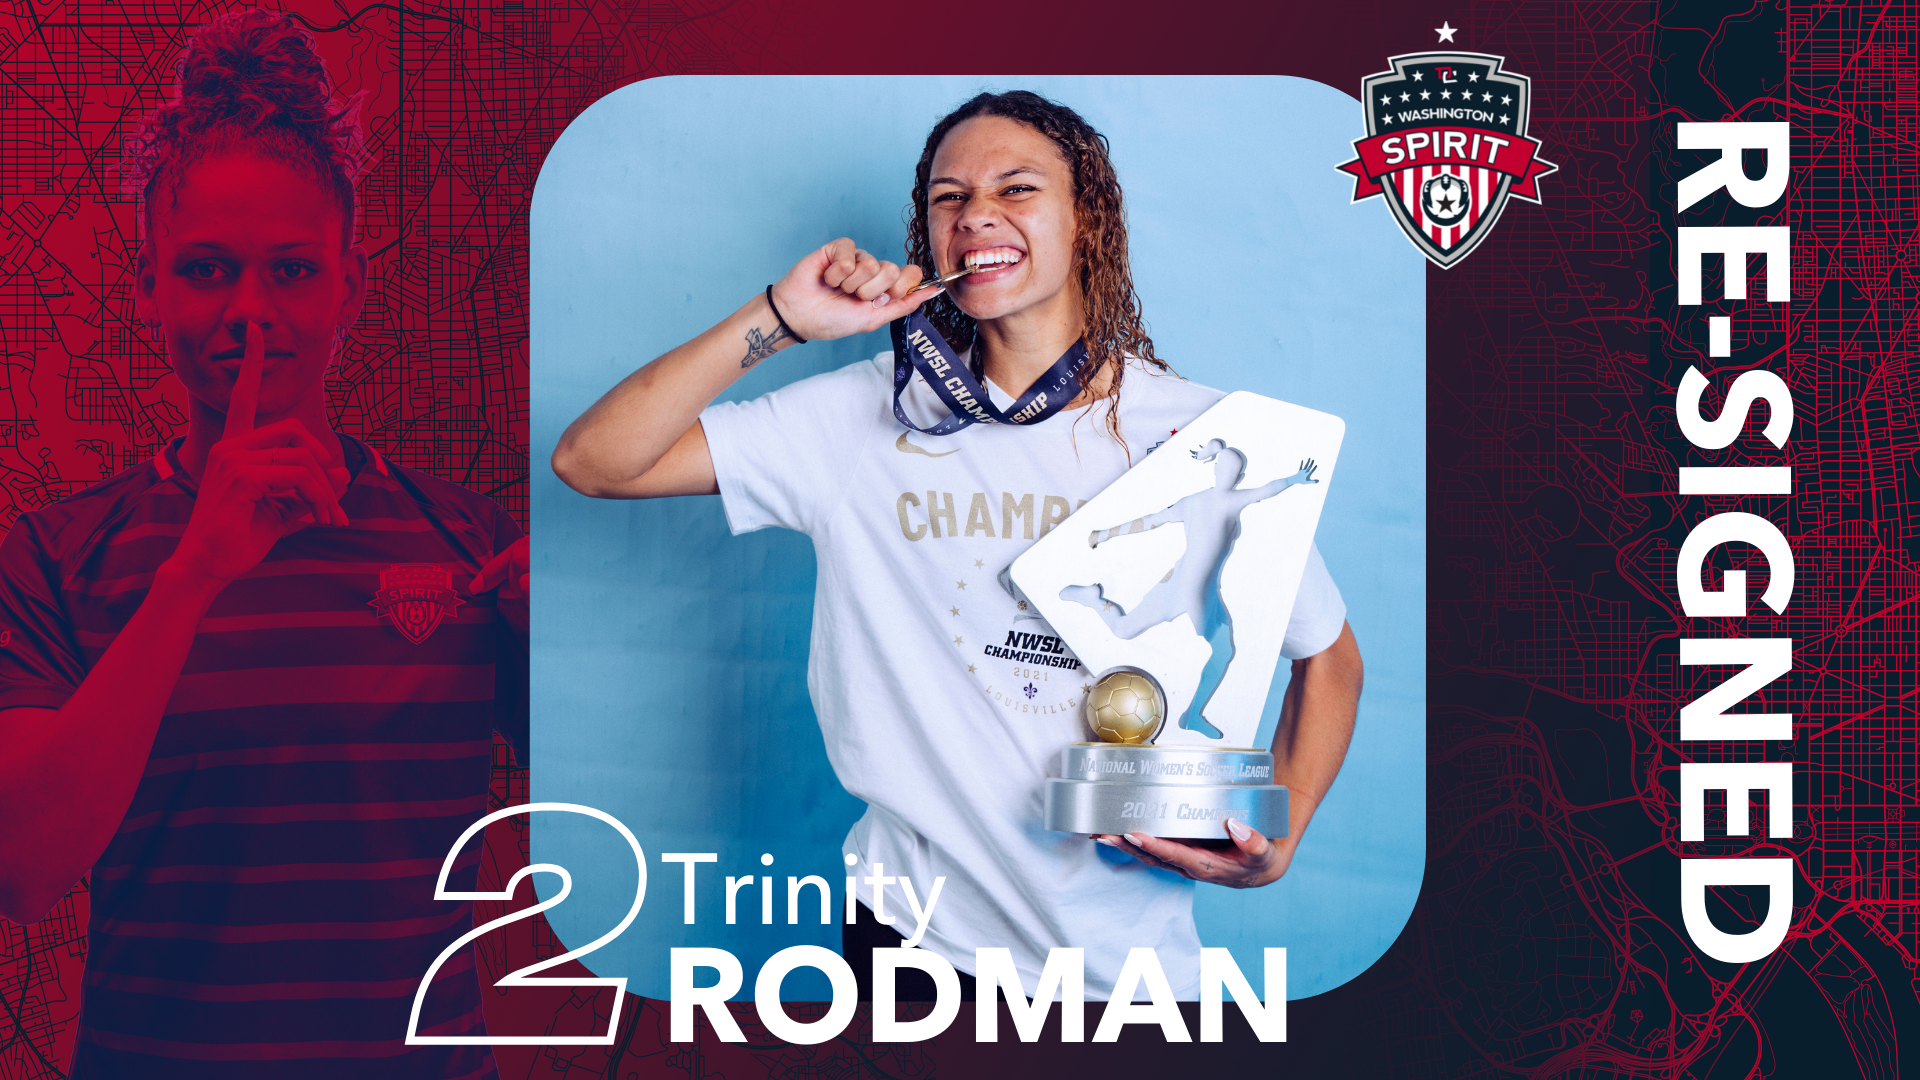 Washington Spirit Re-Sign Forward Trinity Rodman to New Contract Featured Image